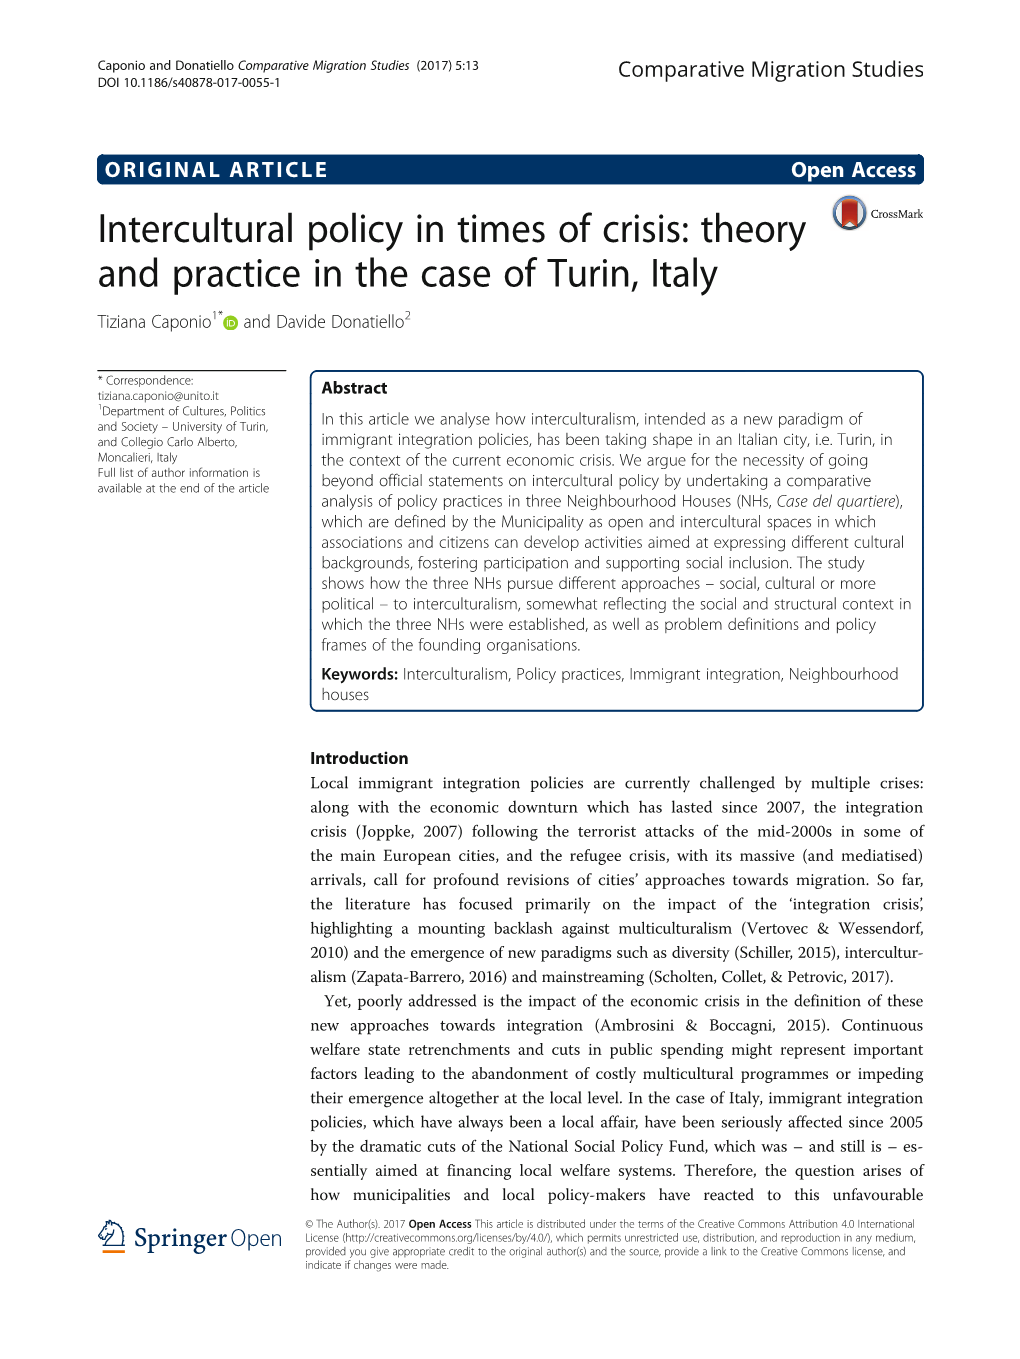 Intercultural Policy in Times of Crisis: Theory and Practice in the Case of Turin, Italy Tiziana Caponio1* and Davide Donatiello2